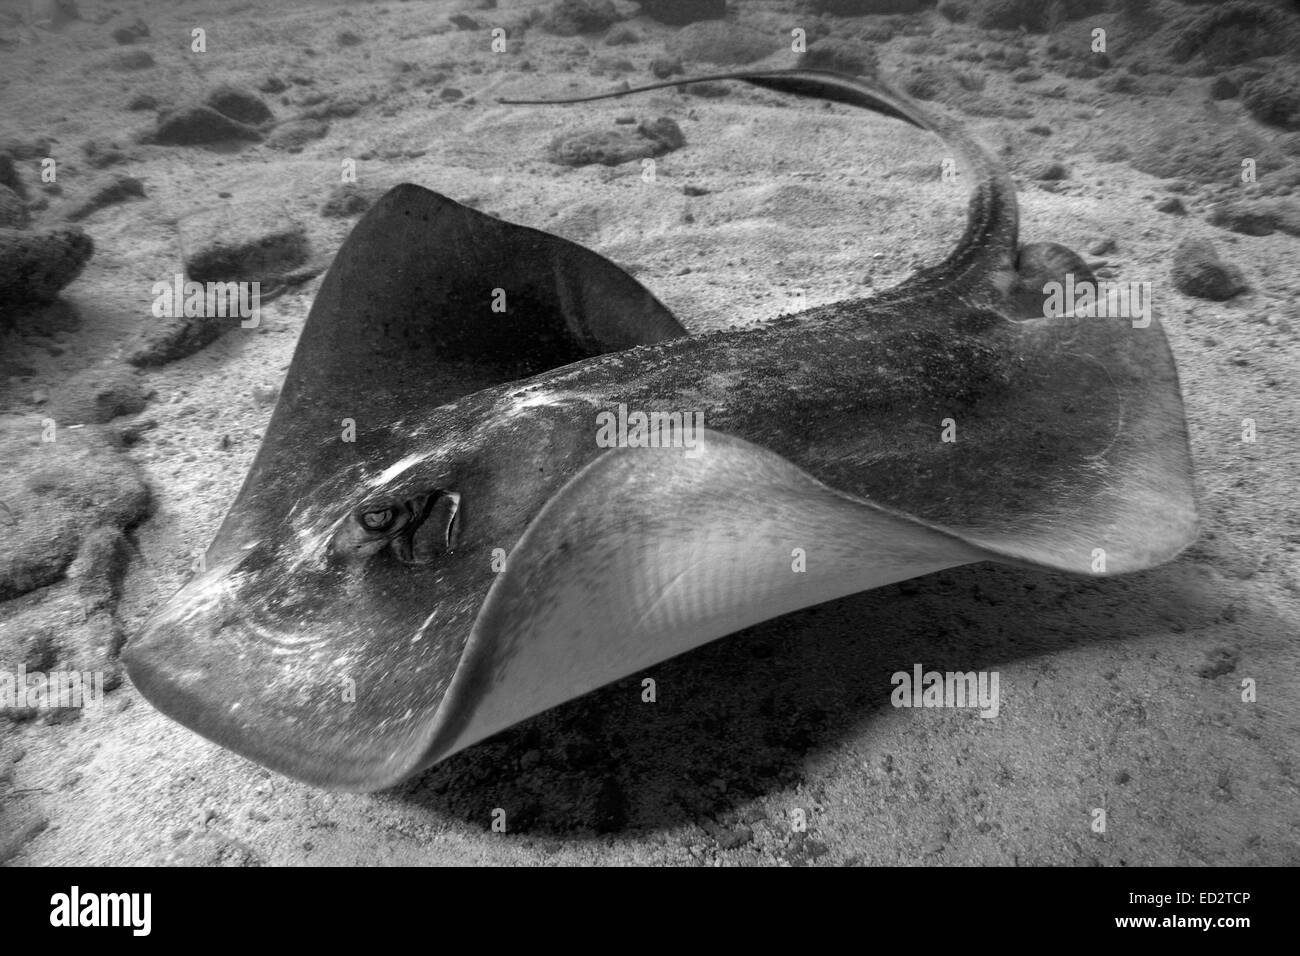 A black and white image of a Southern Stingray swimming along the bottom of the ocean off of the Florida Keys. Stock Photo